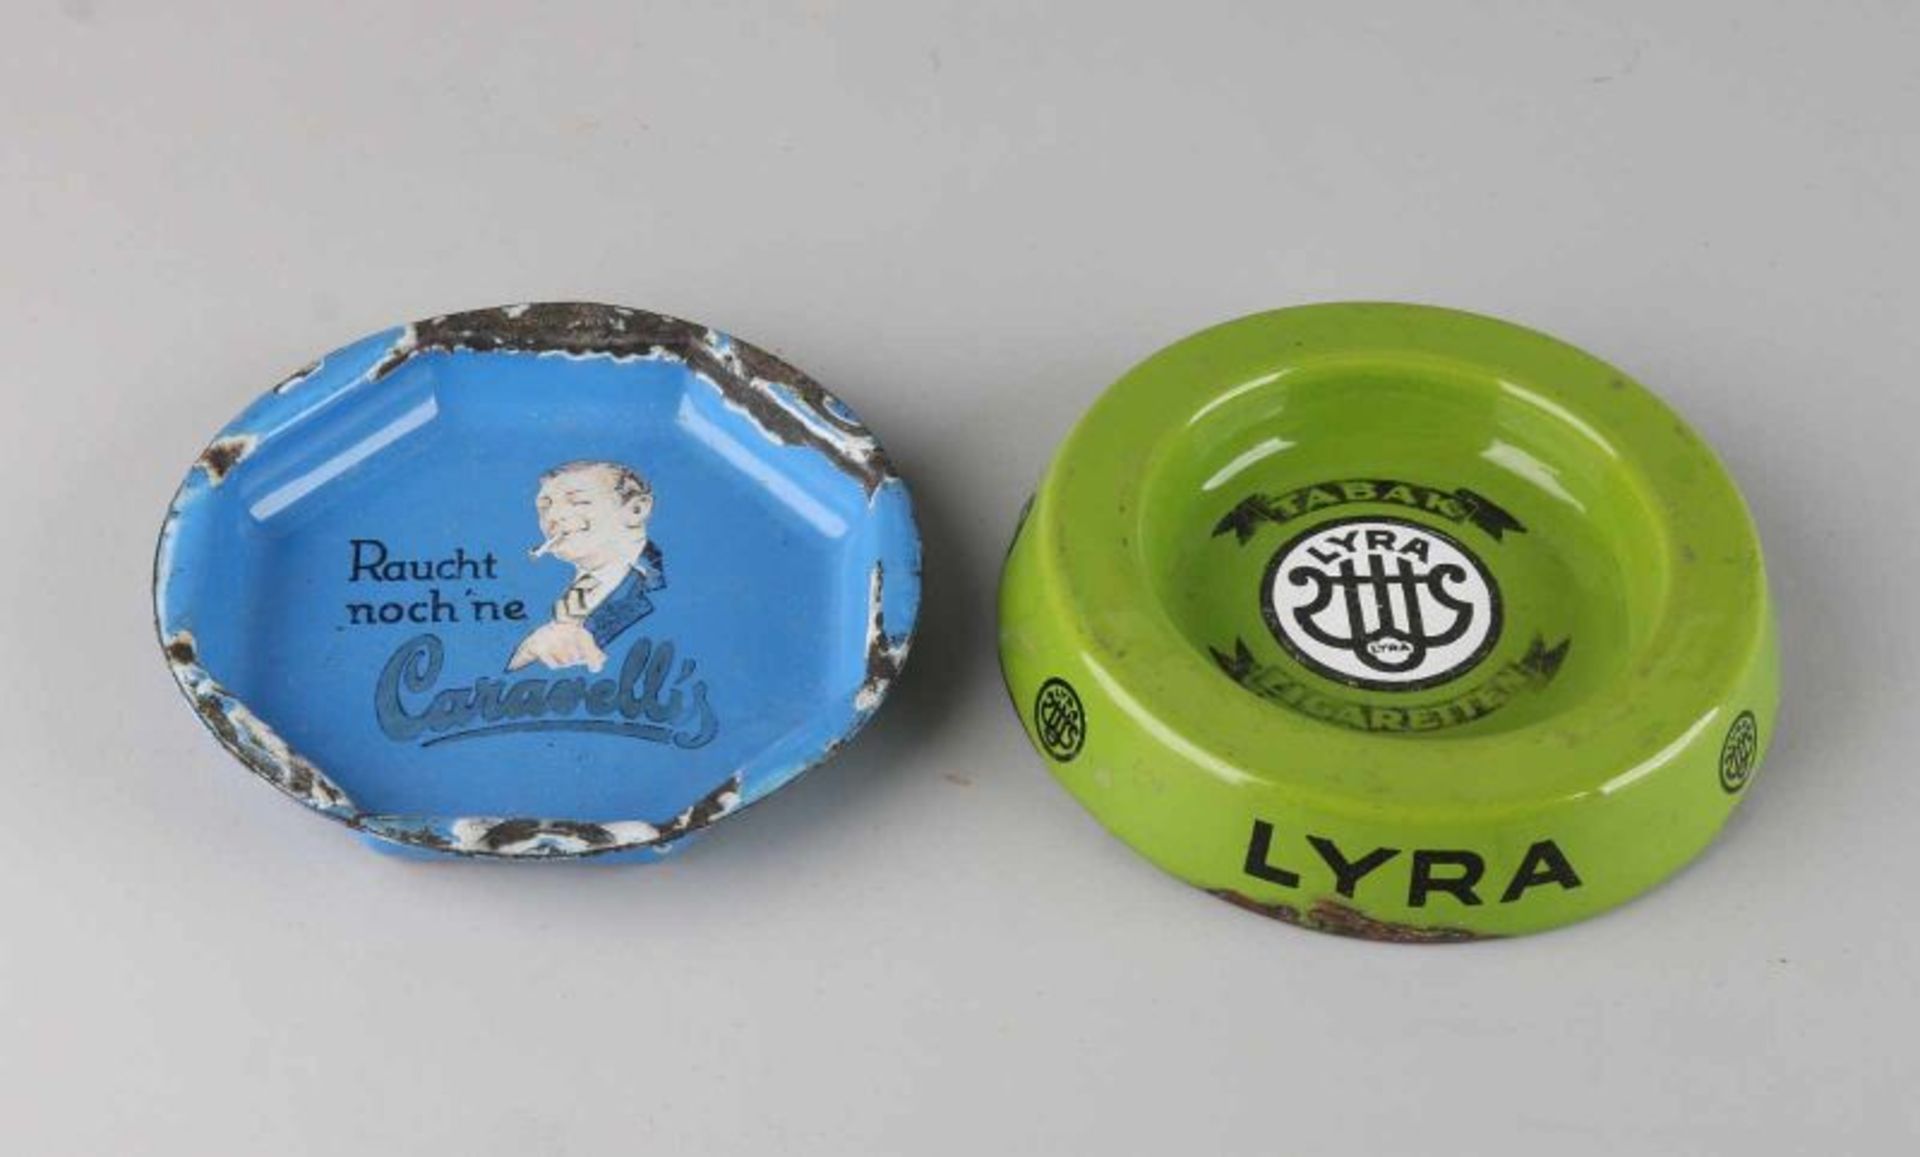 Two enamelled ashtrays with advertising. 20th century. Comprising: Rauch noch'ne Caravellis and Lyra